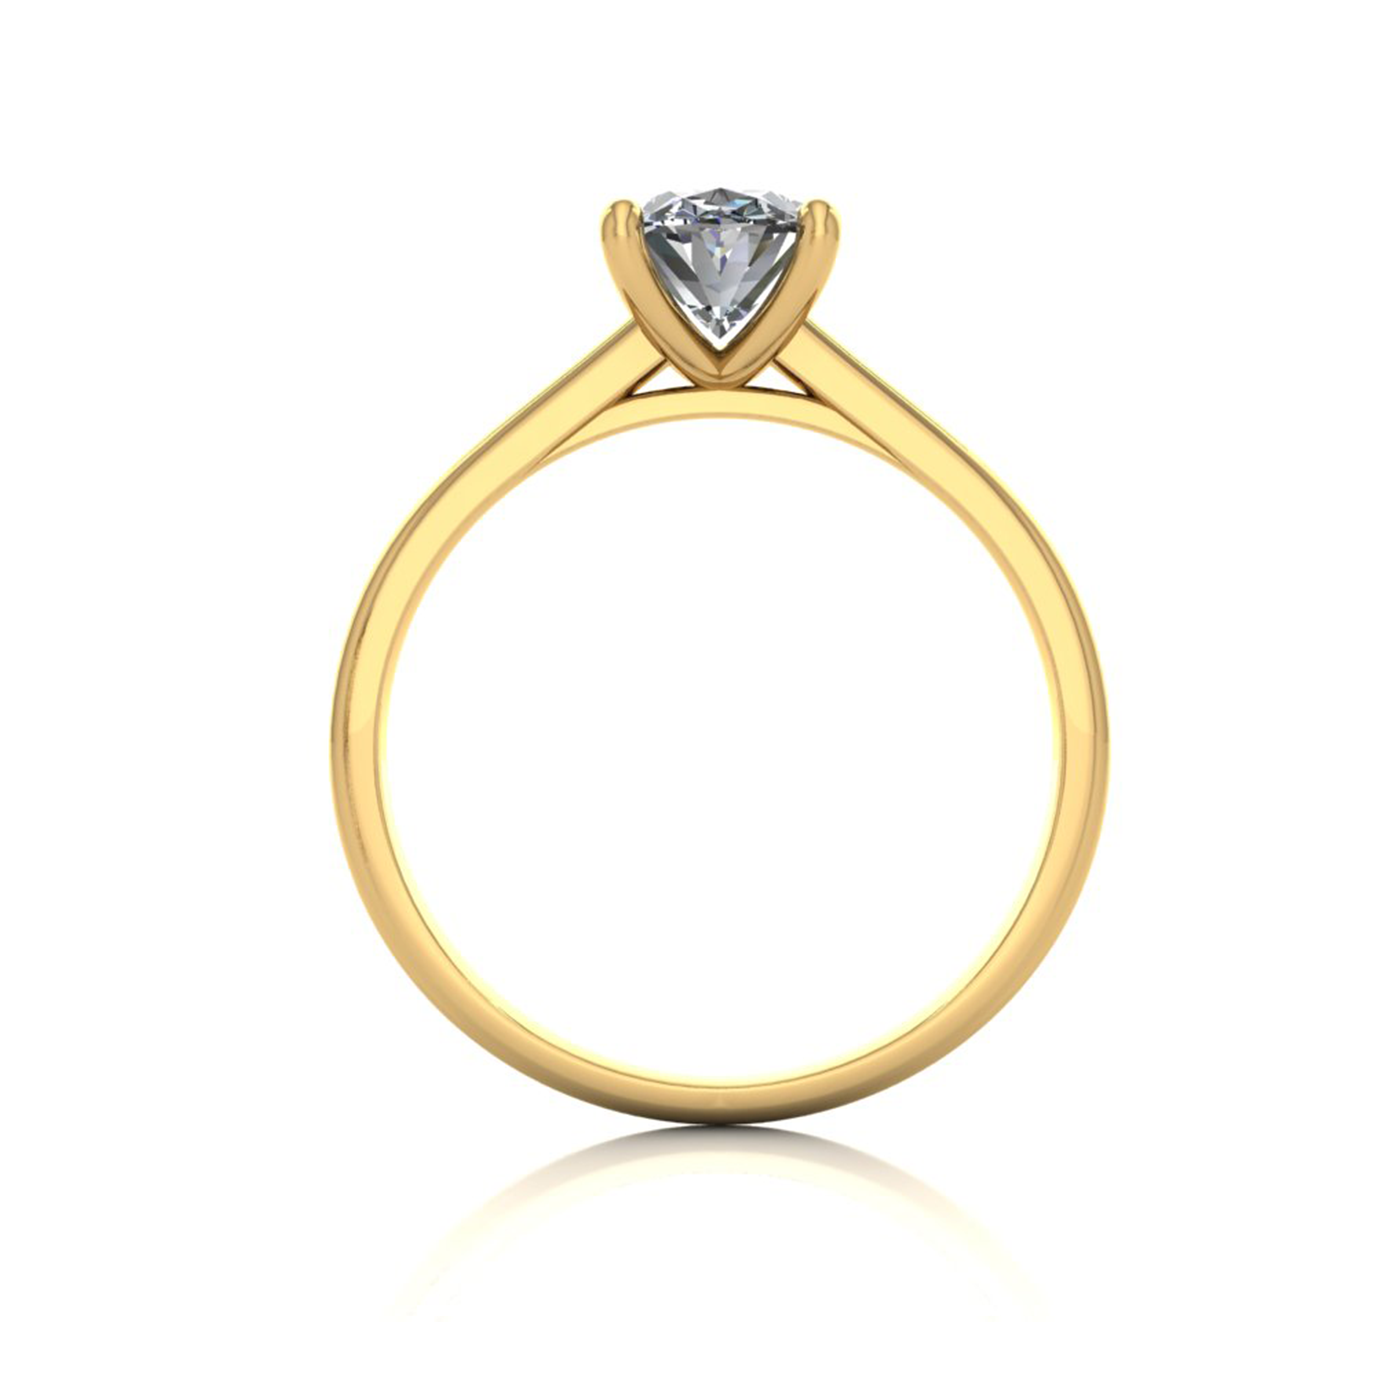 18K YELLOW GOLD 4 PRONGS SOLITAIRE OVAL CUT DIAMOND ENGAGEMENT RING WITH WHISPER THIN BAND